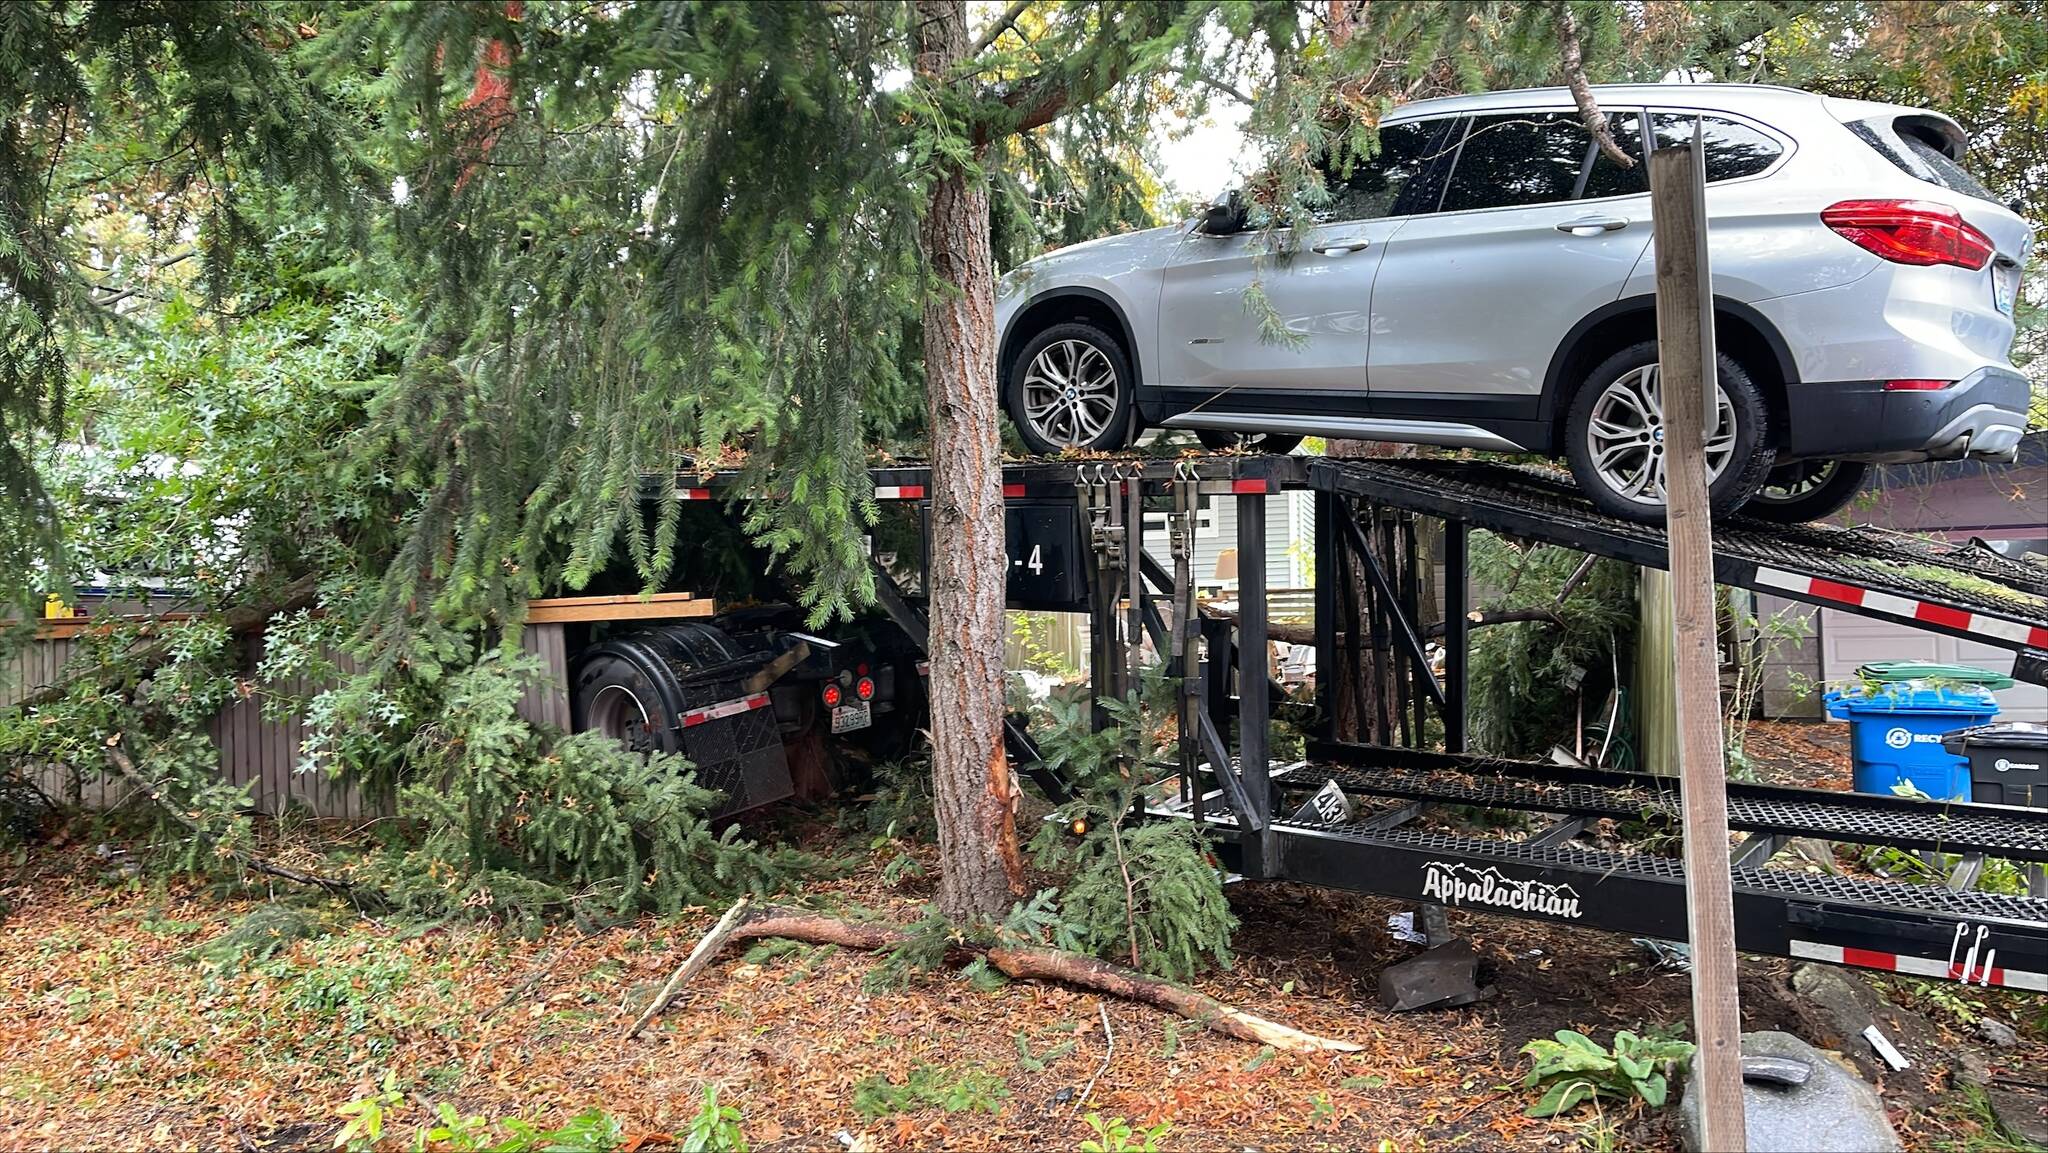 A tractor-trailer veered off the road in the 4300 block of Island Crest Way on Oct. 5. Courtesy of the Mercer Island Police Department